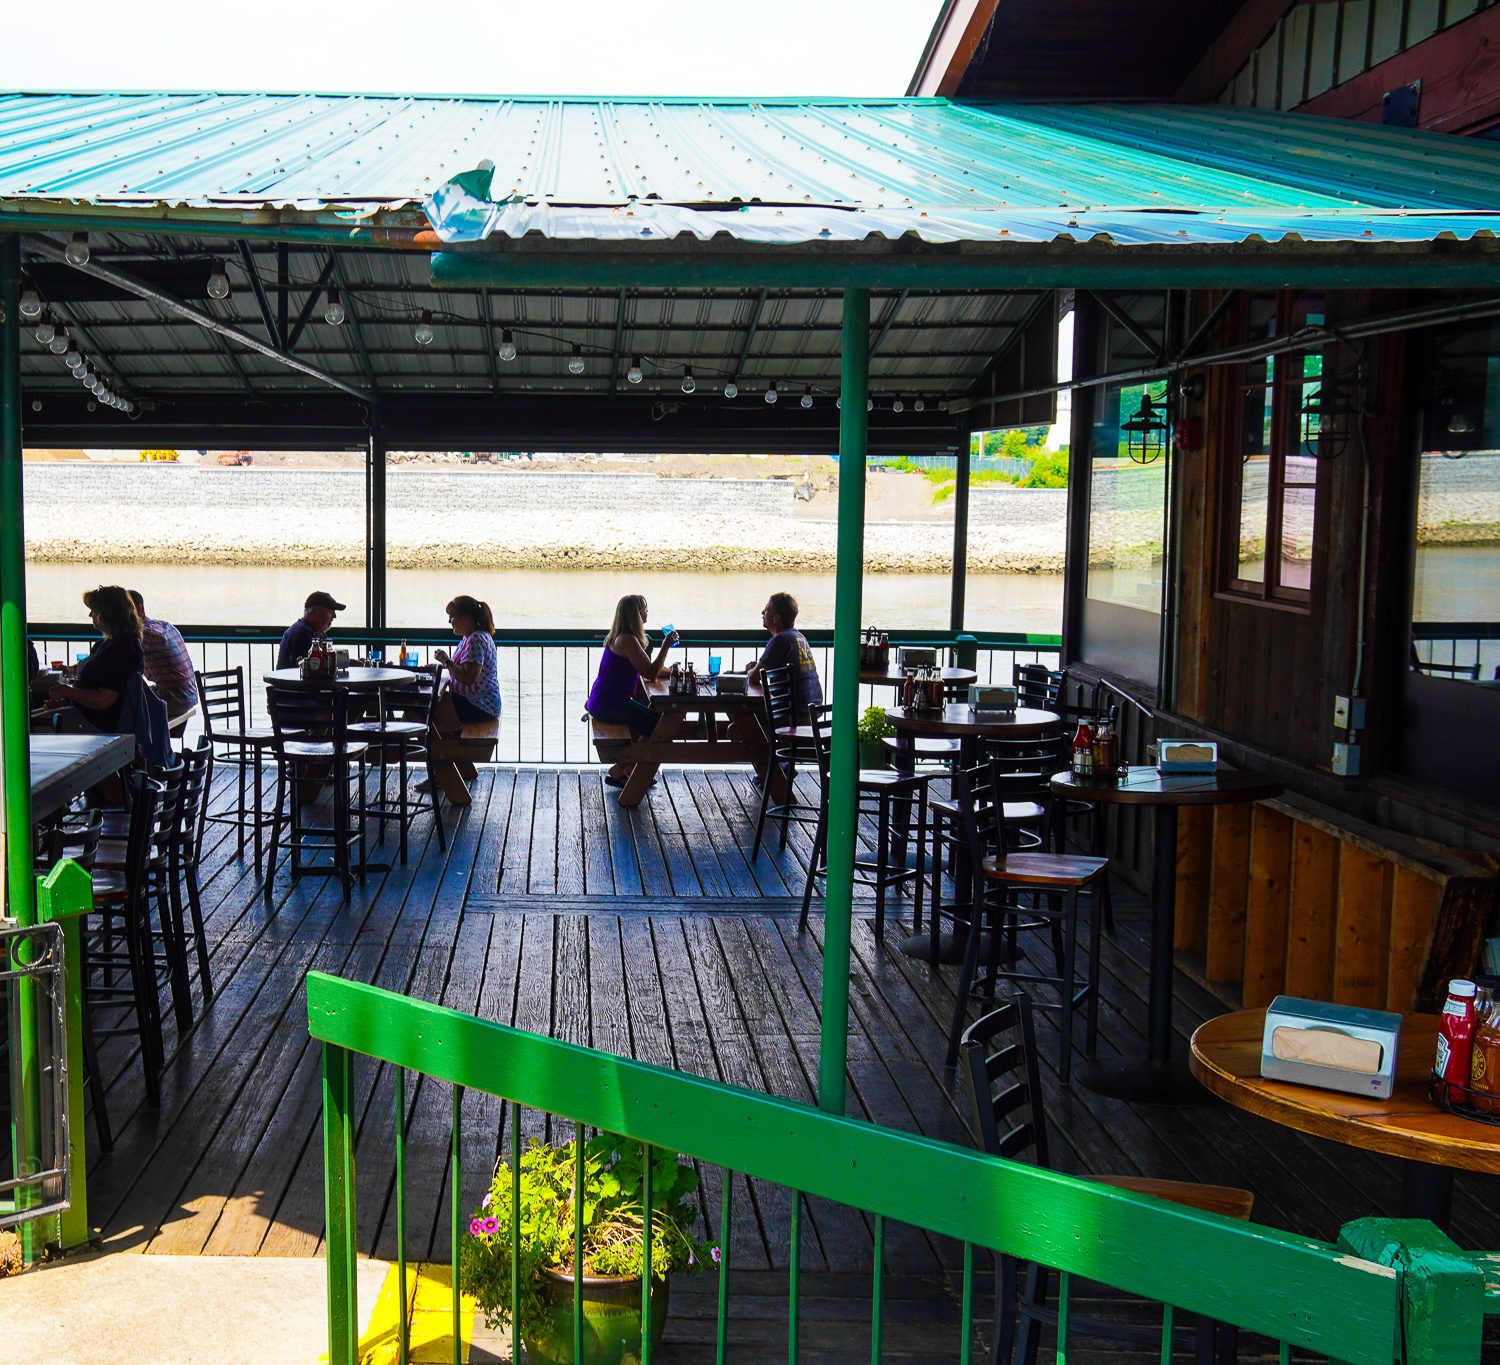 The outdoor riverside patio in Troy.